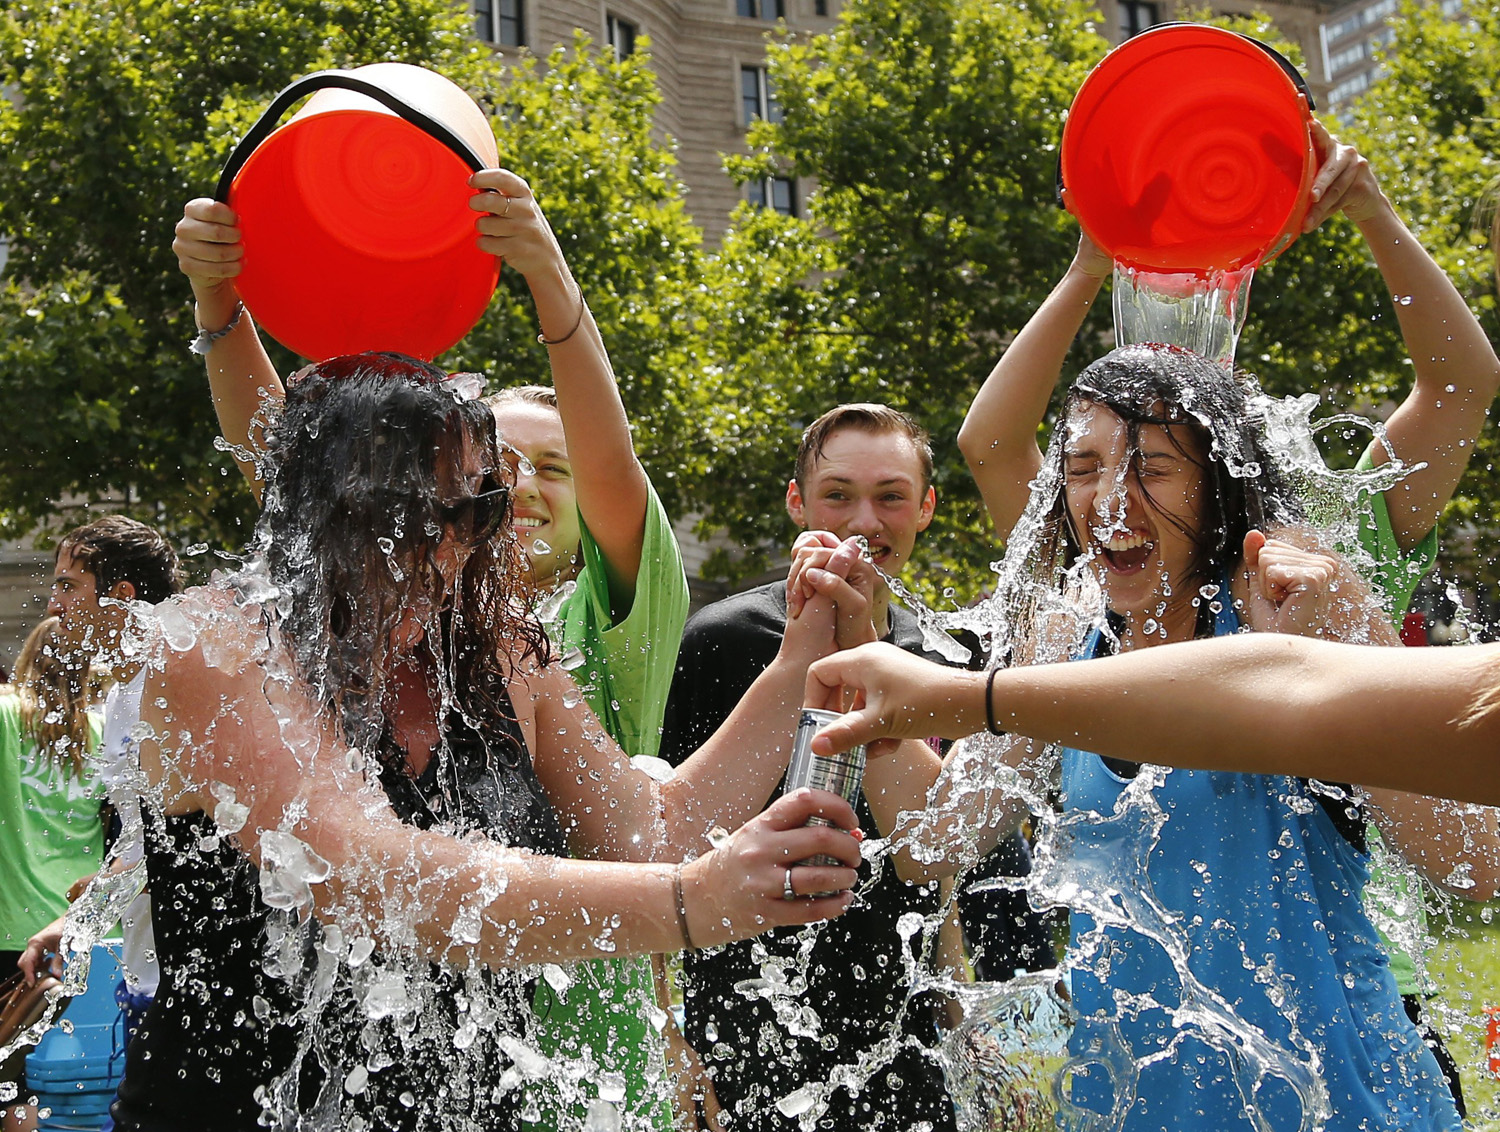 Two women get doused during the ice bucket challenge at Boston's Copley Square on Aug. 7, 2014.